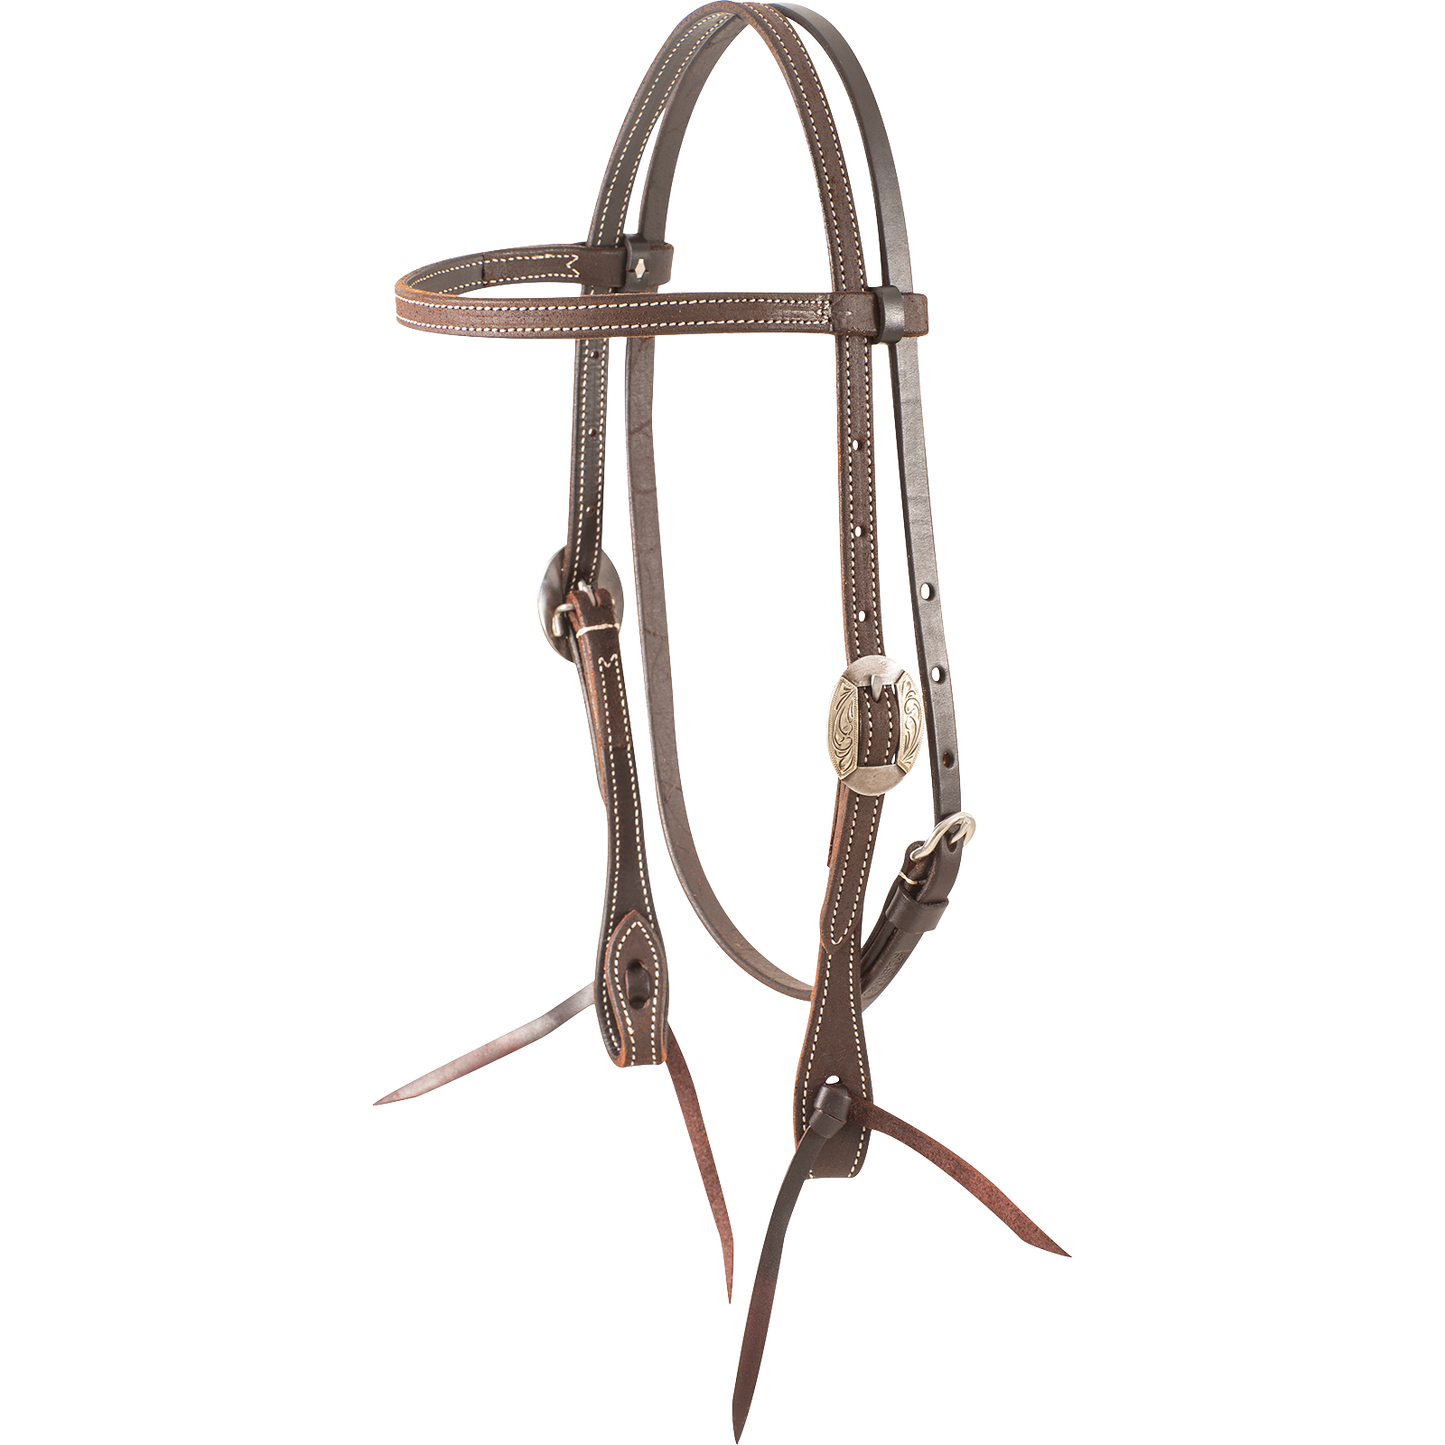 Copia di Headstall #73 - Browband Headstall Clarendon Buckle Chocolate Rout